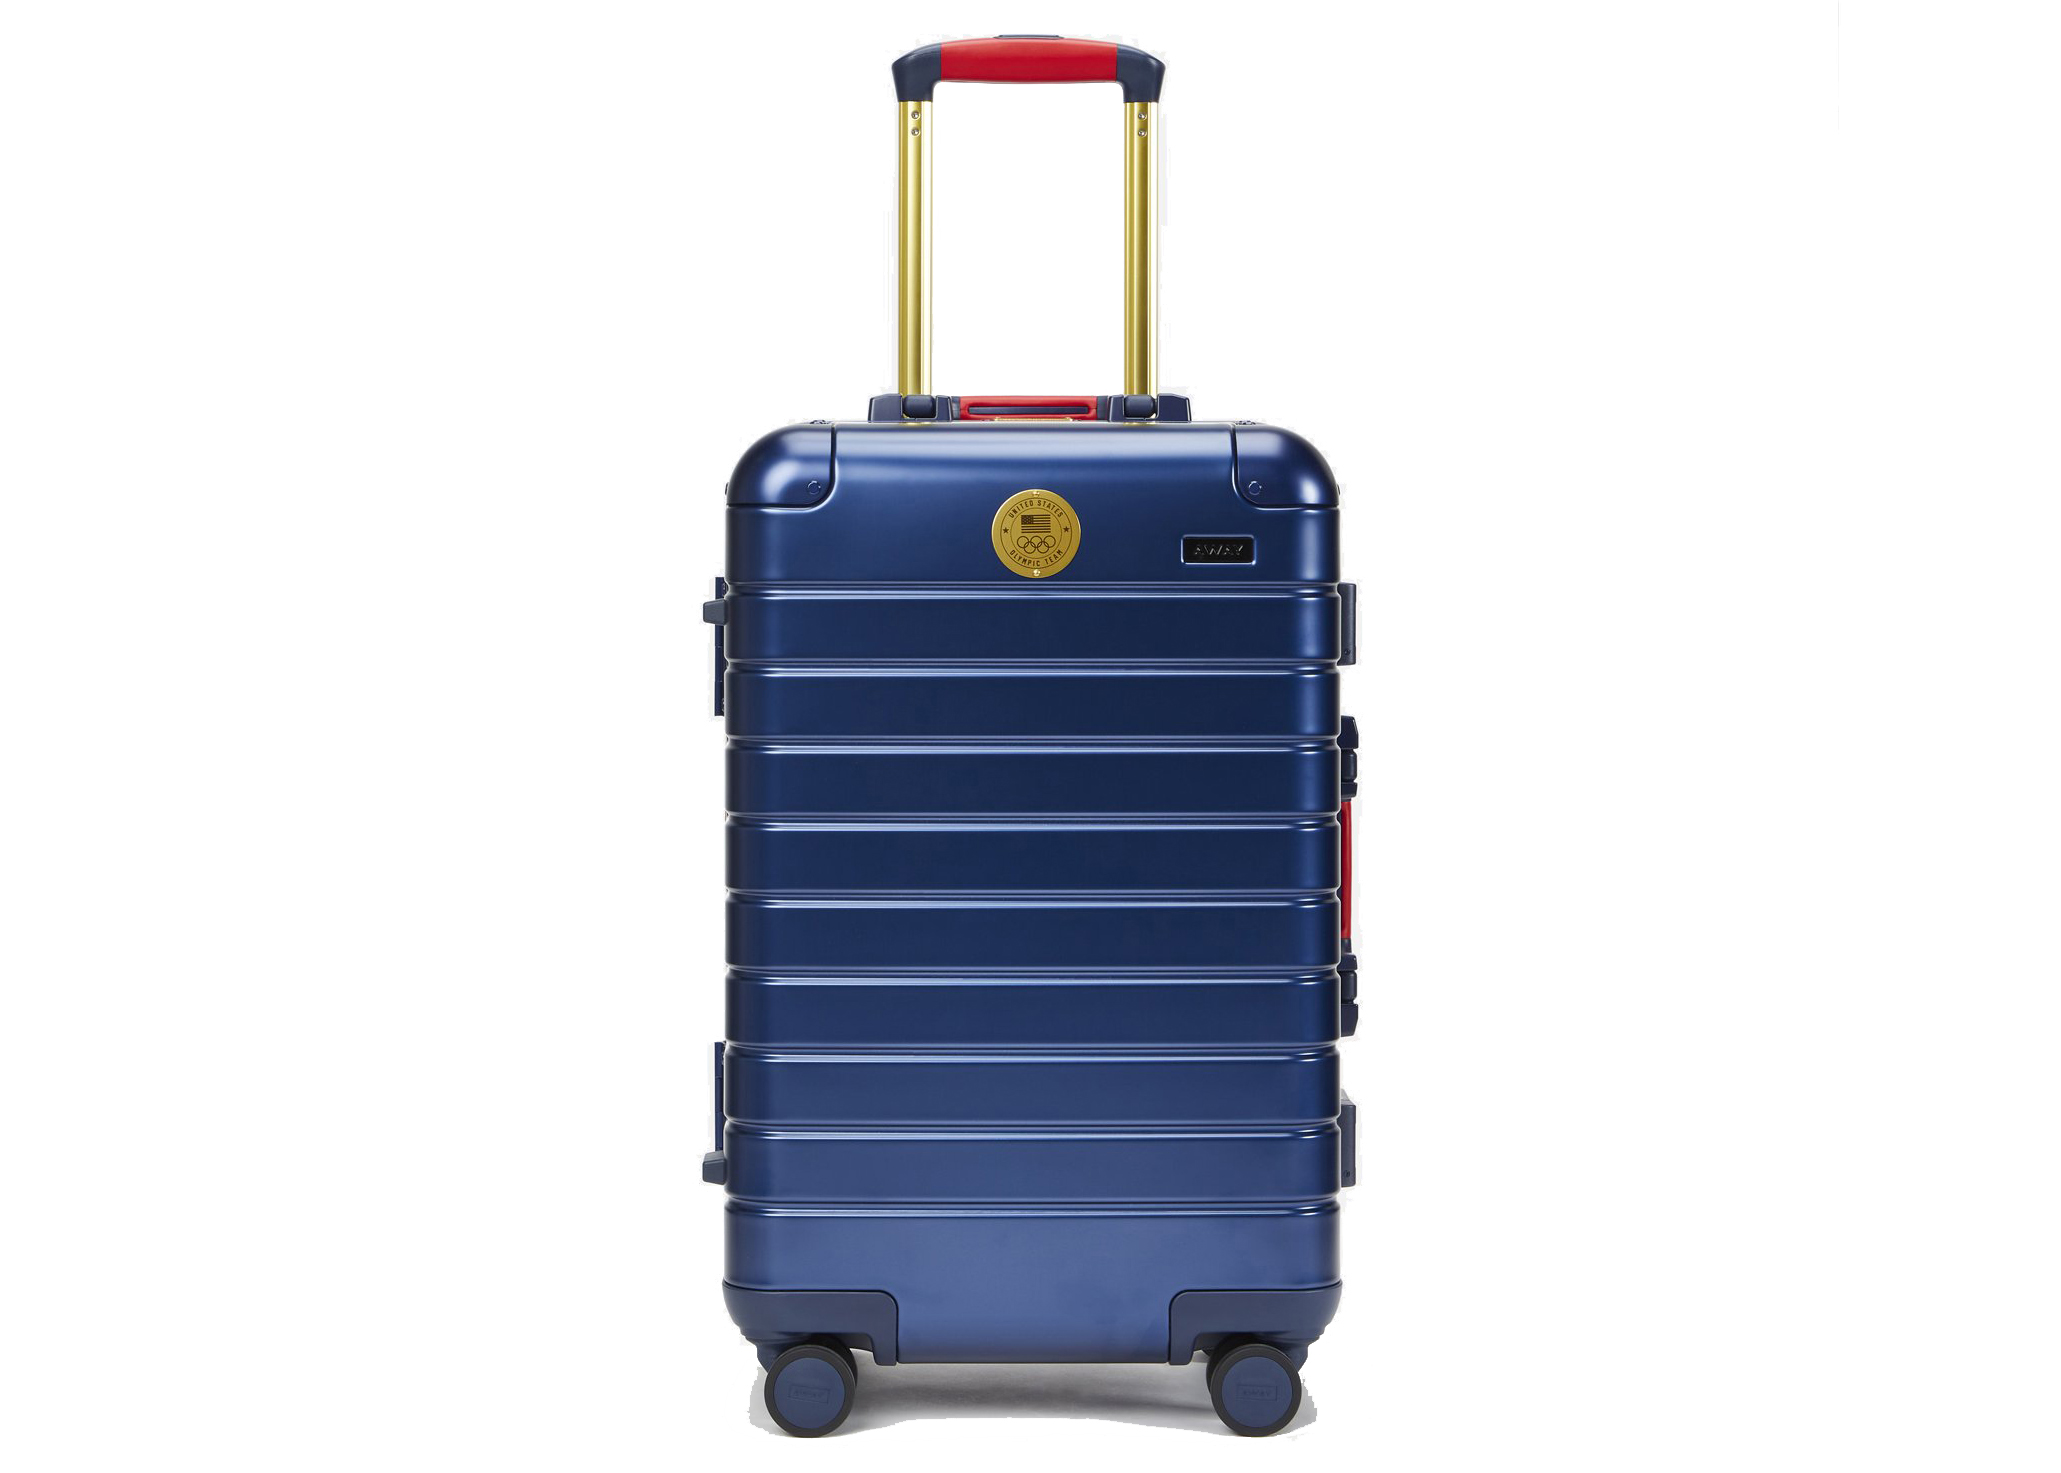 Kith for Team USA & Away Aluminum Bigger Carry-On Luggage 